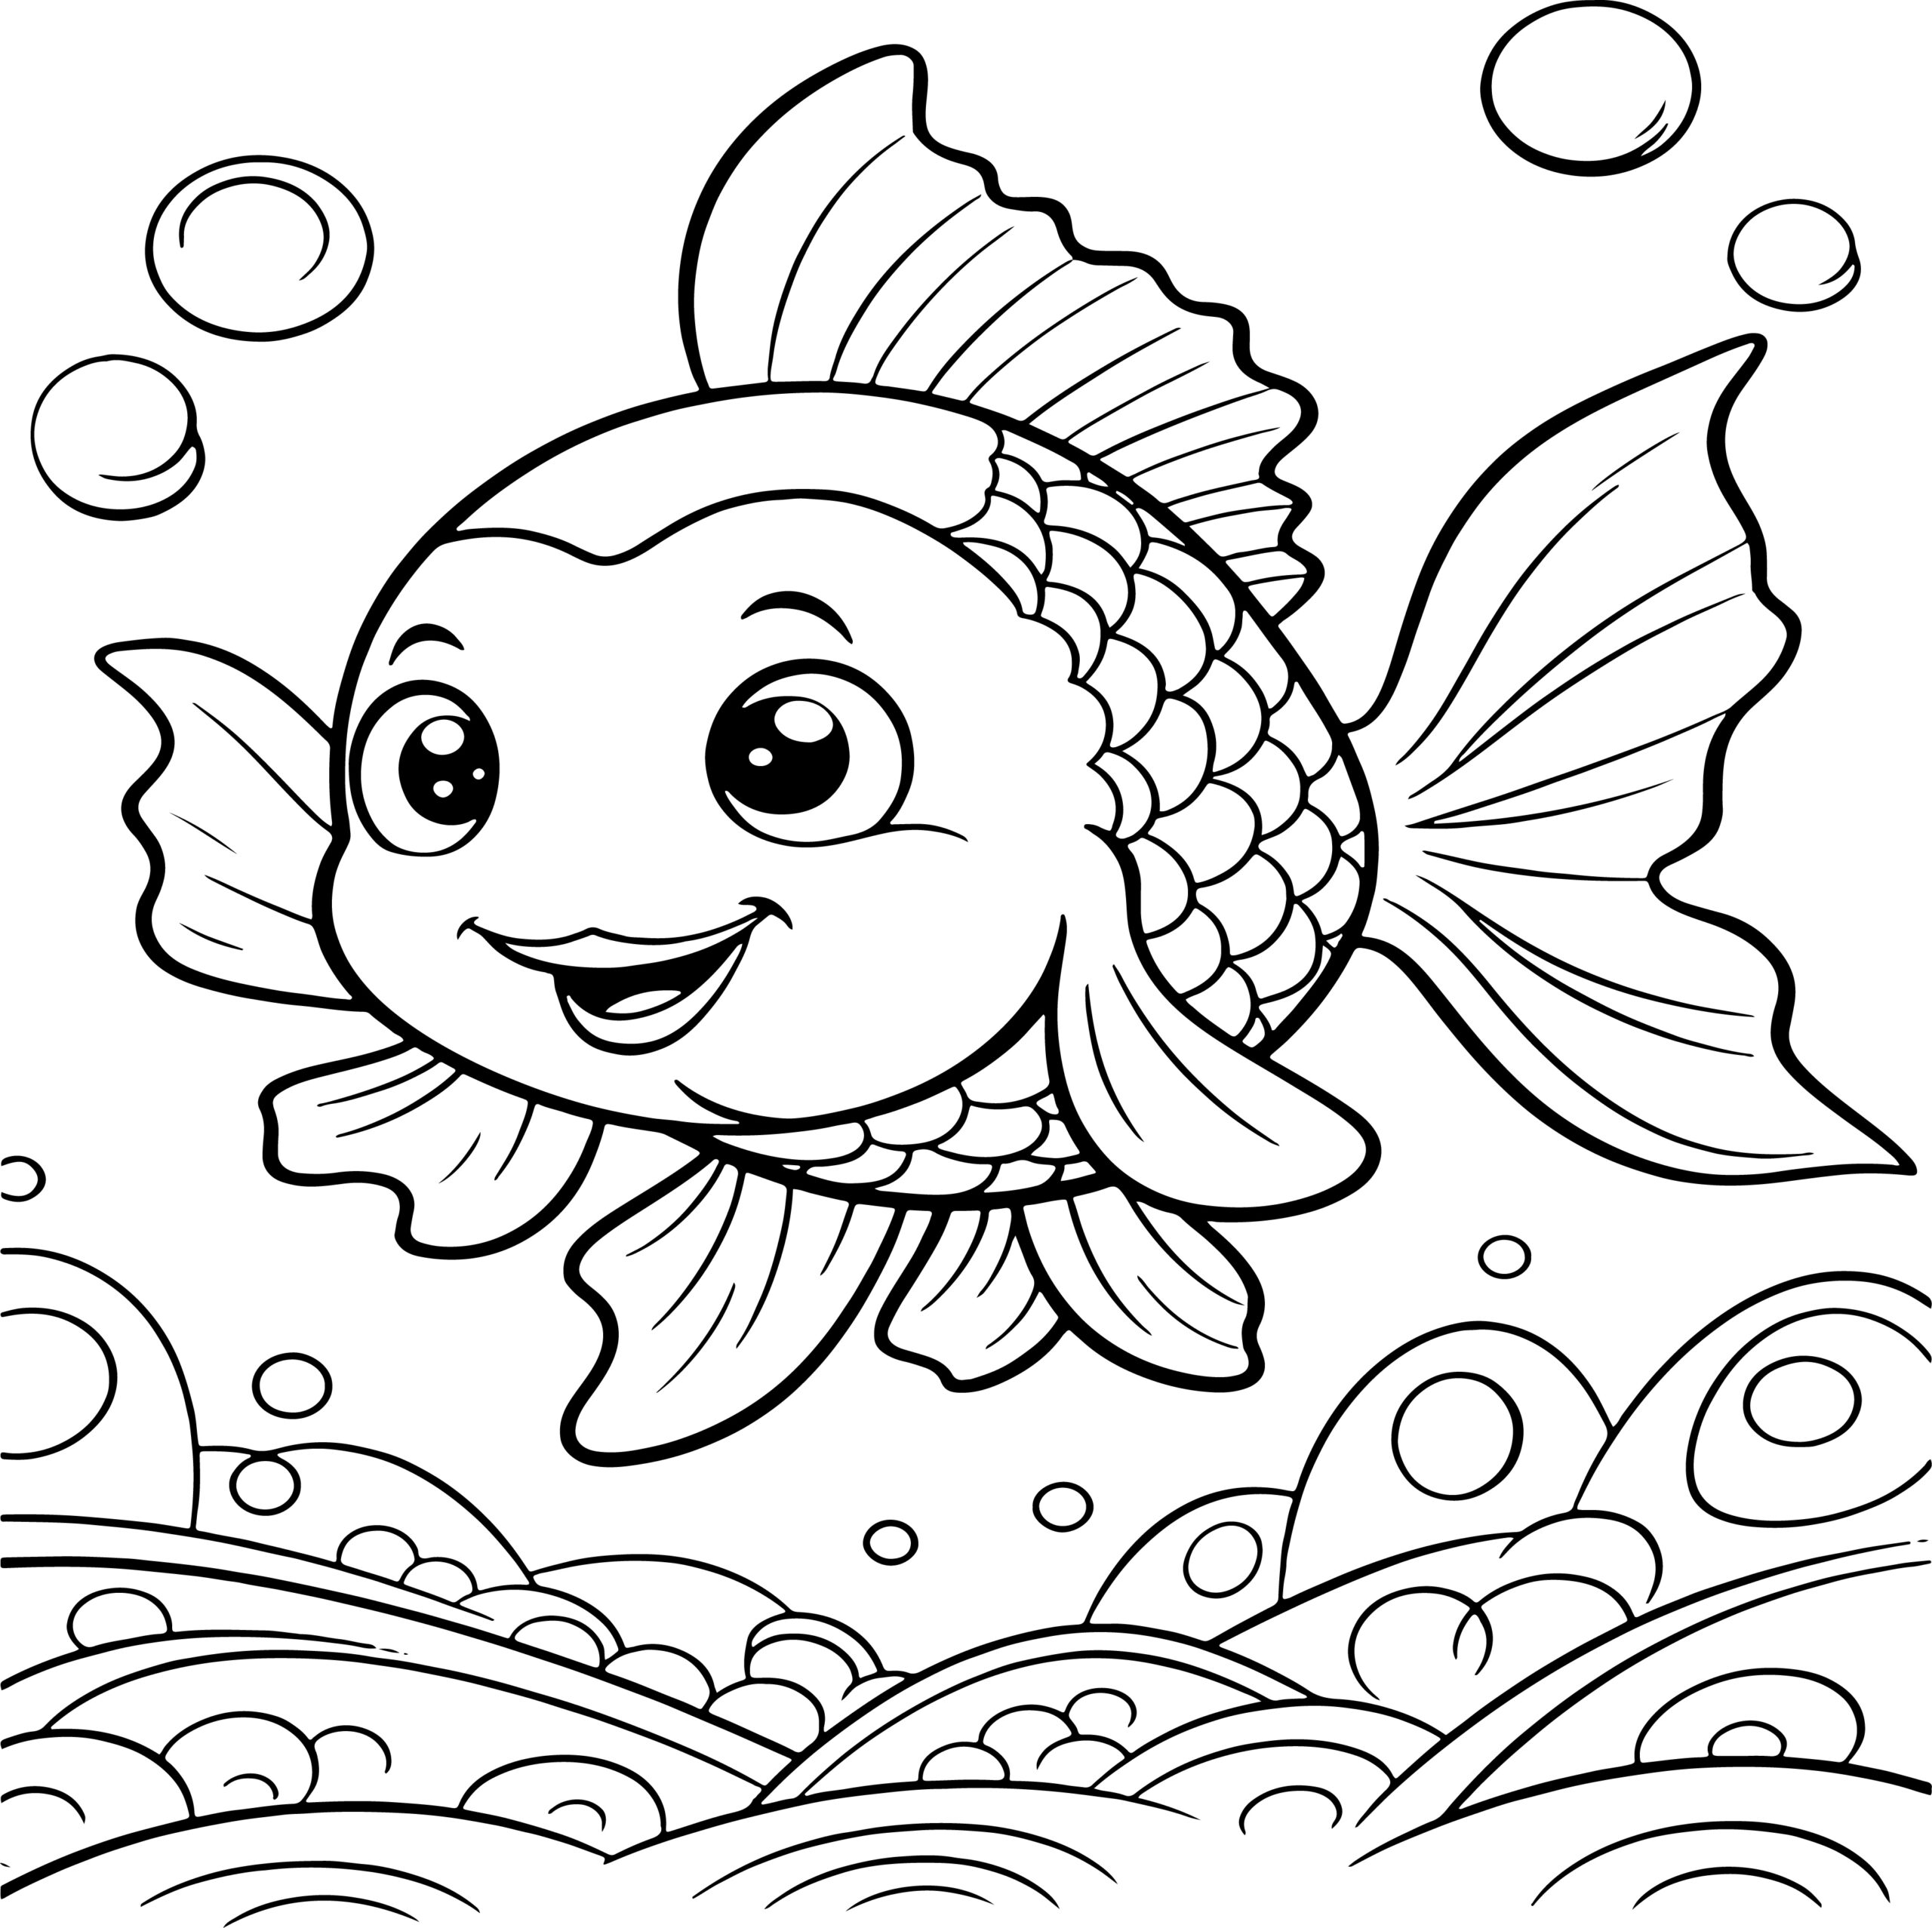 Fish coloring book for kids fish coloring pages fantastic gift for boys girls made by teachers